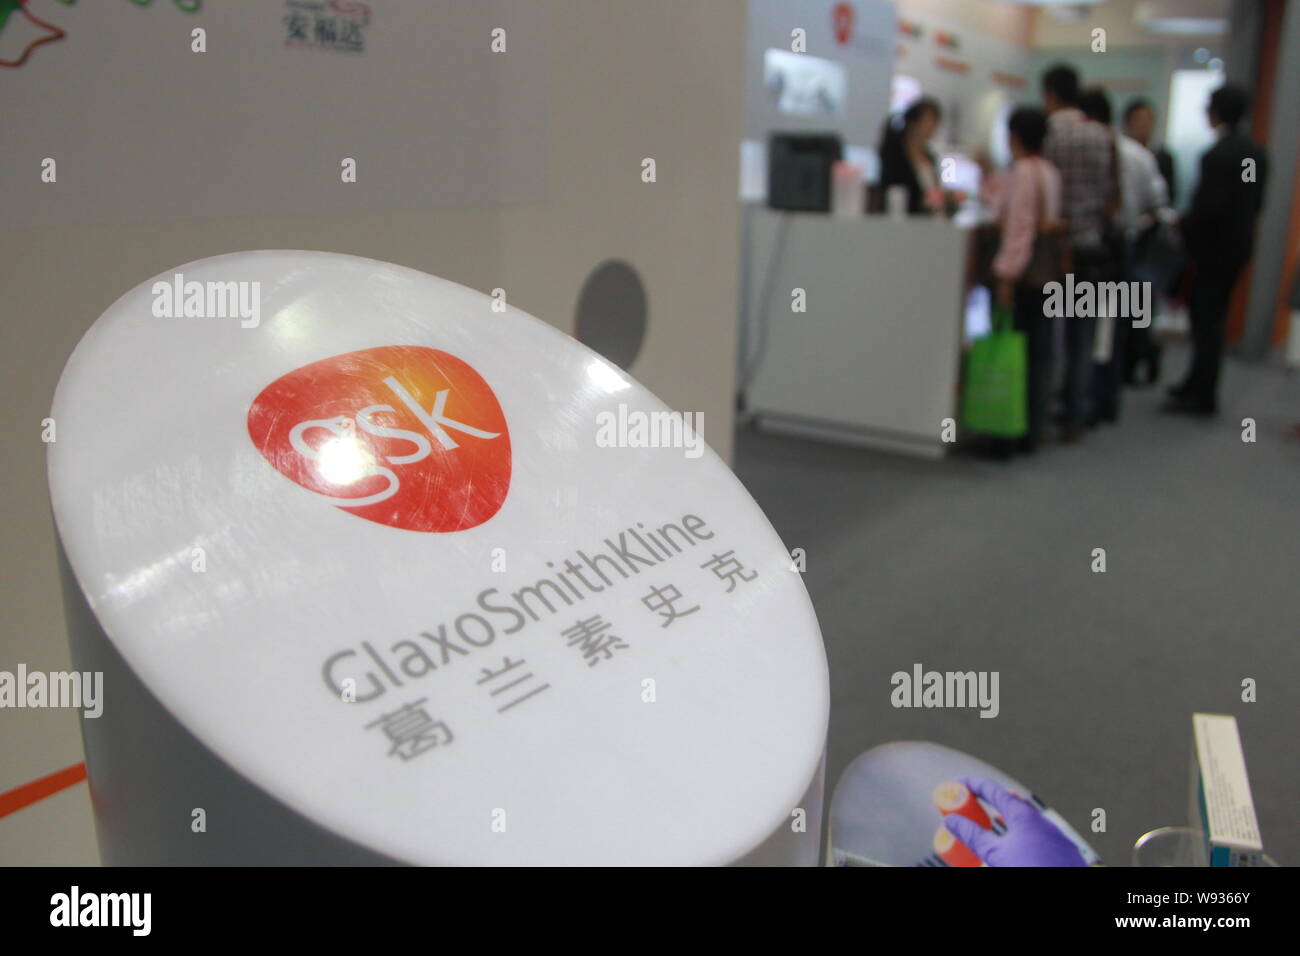 --FILE--People visit the stand of GlaxoSmithKline (GSK) during an exhibition in Shanghai, China, 11 May 2013.   GlaxoSmithKline, the British drug comp Stock Photo